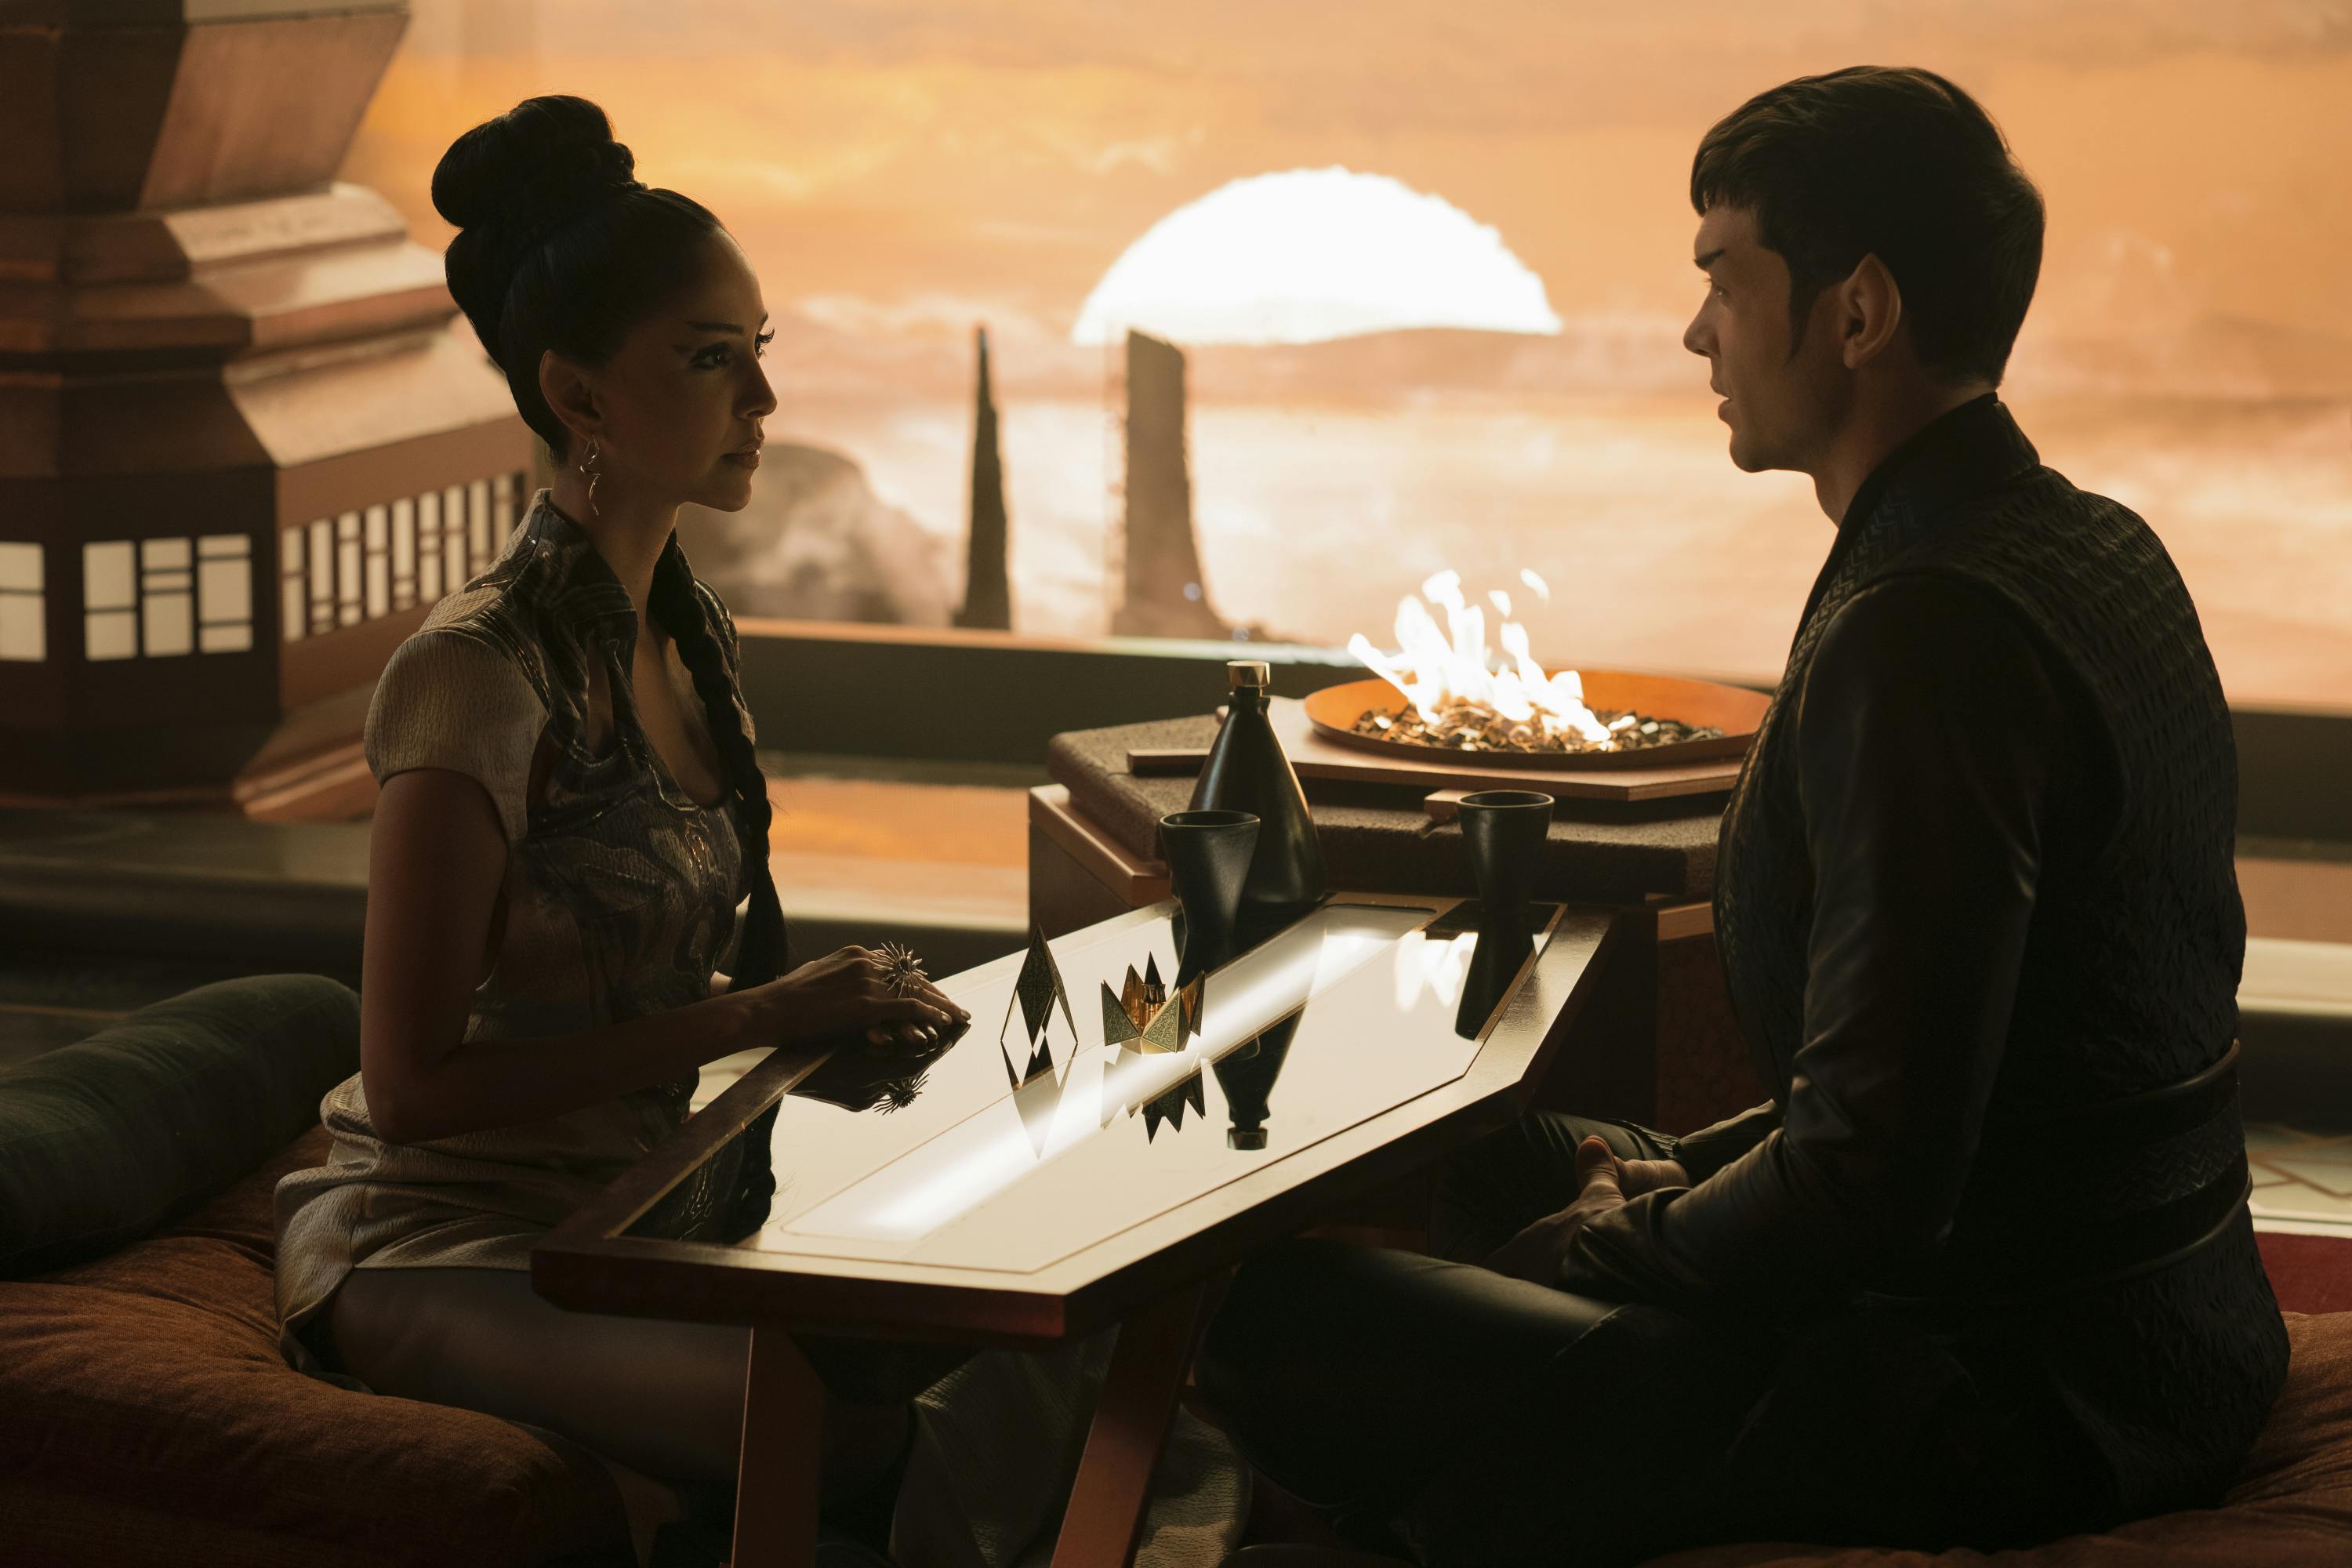 T'Pring, in Vulcan mating colors, proposes to Spock during a romantic dinner on Vulcan in 'Strange New Worlds'